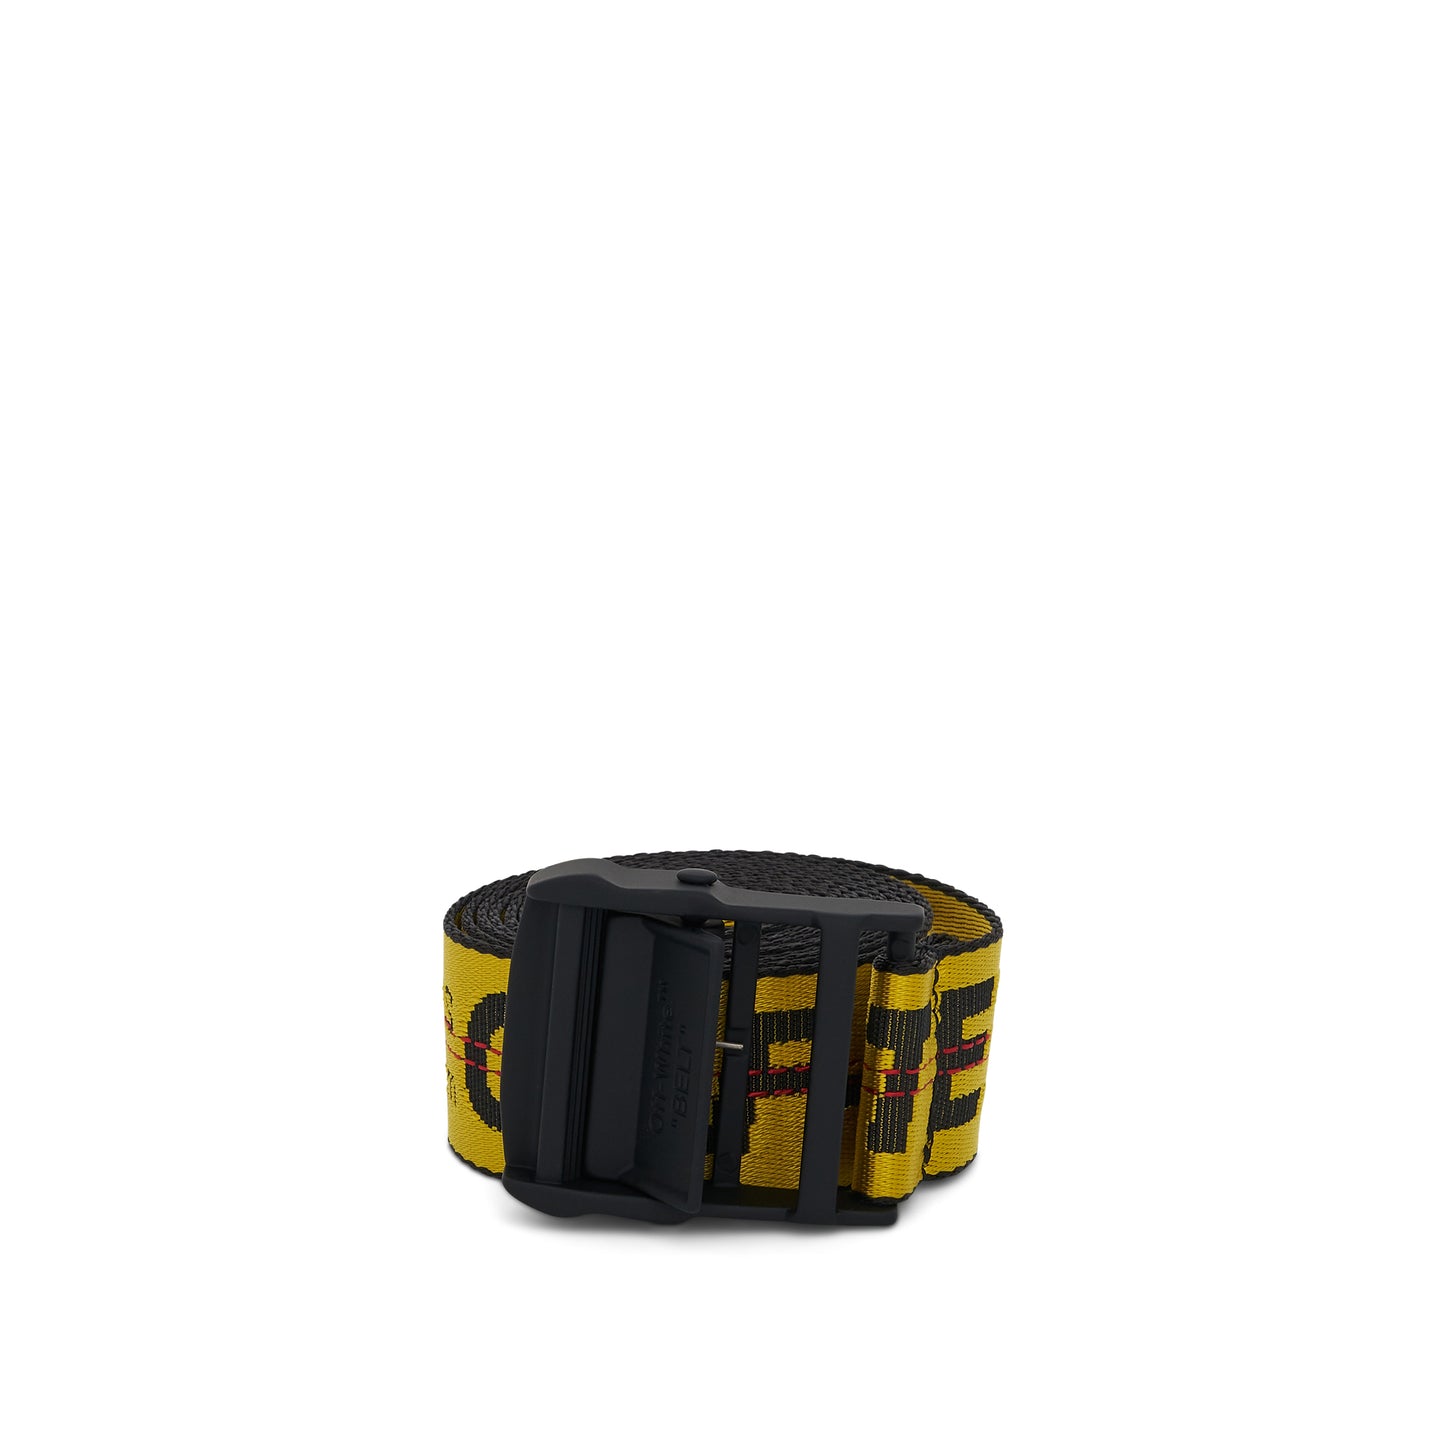 Classic Industrial H35 Belt in Yellow